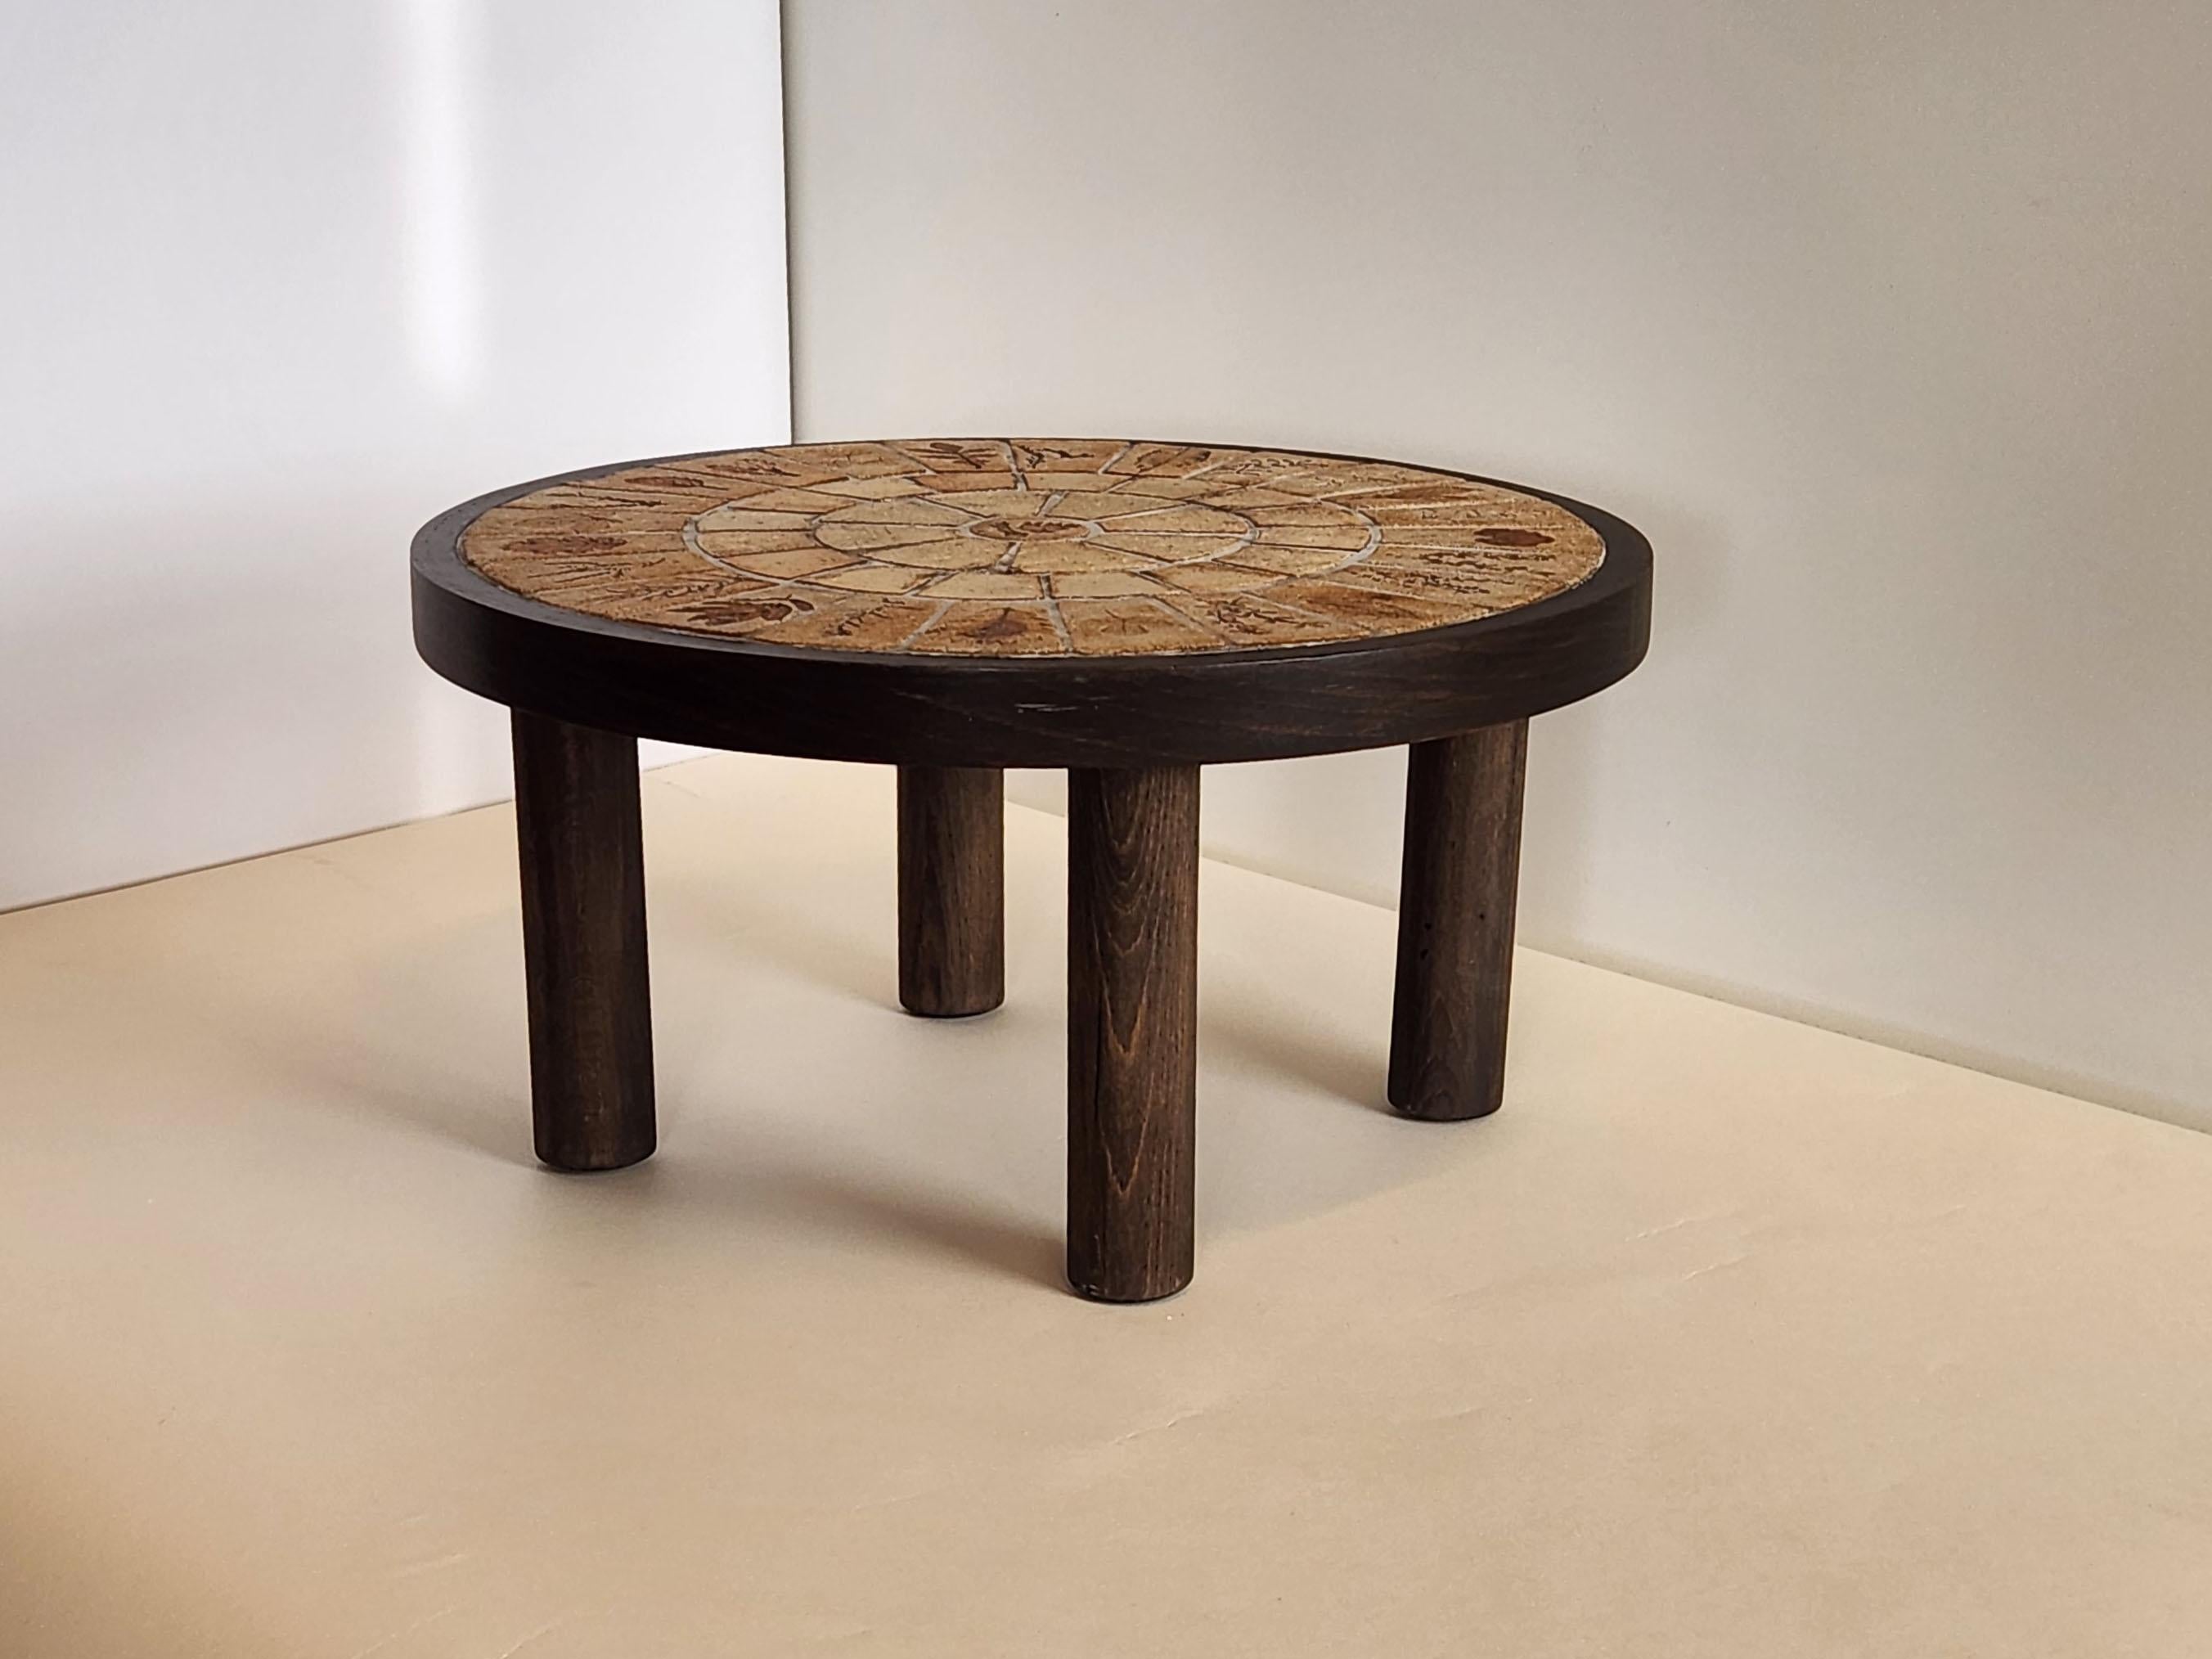 Roger Capron - Vintage Round Side Table with Garrigue Tiles on Wood Frame  For Sale 1